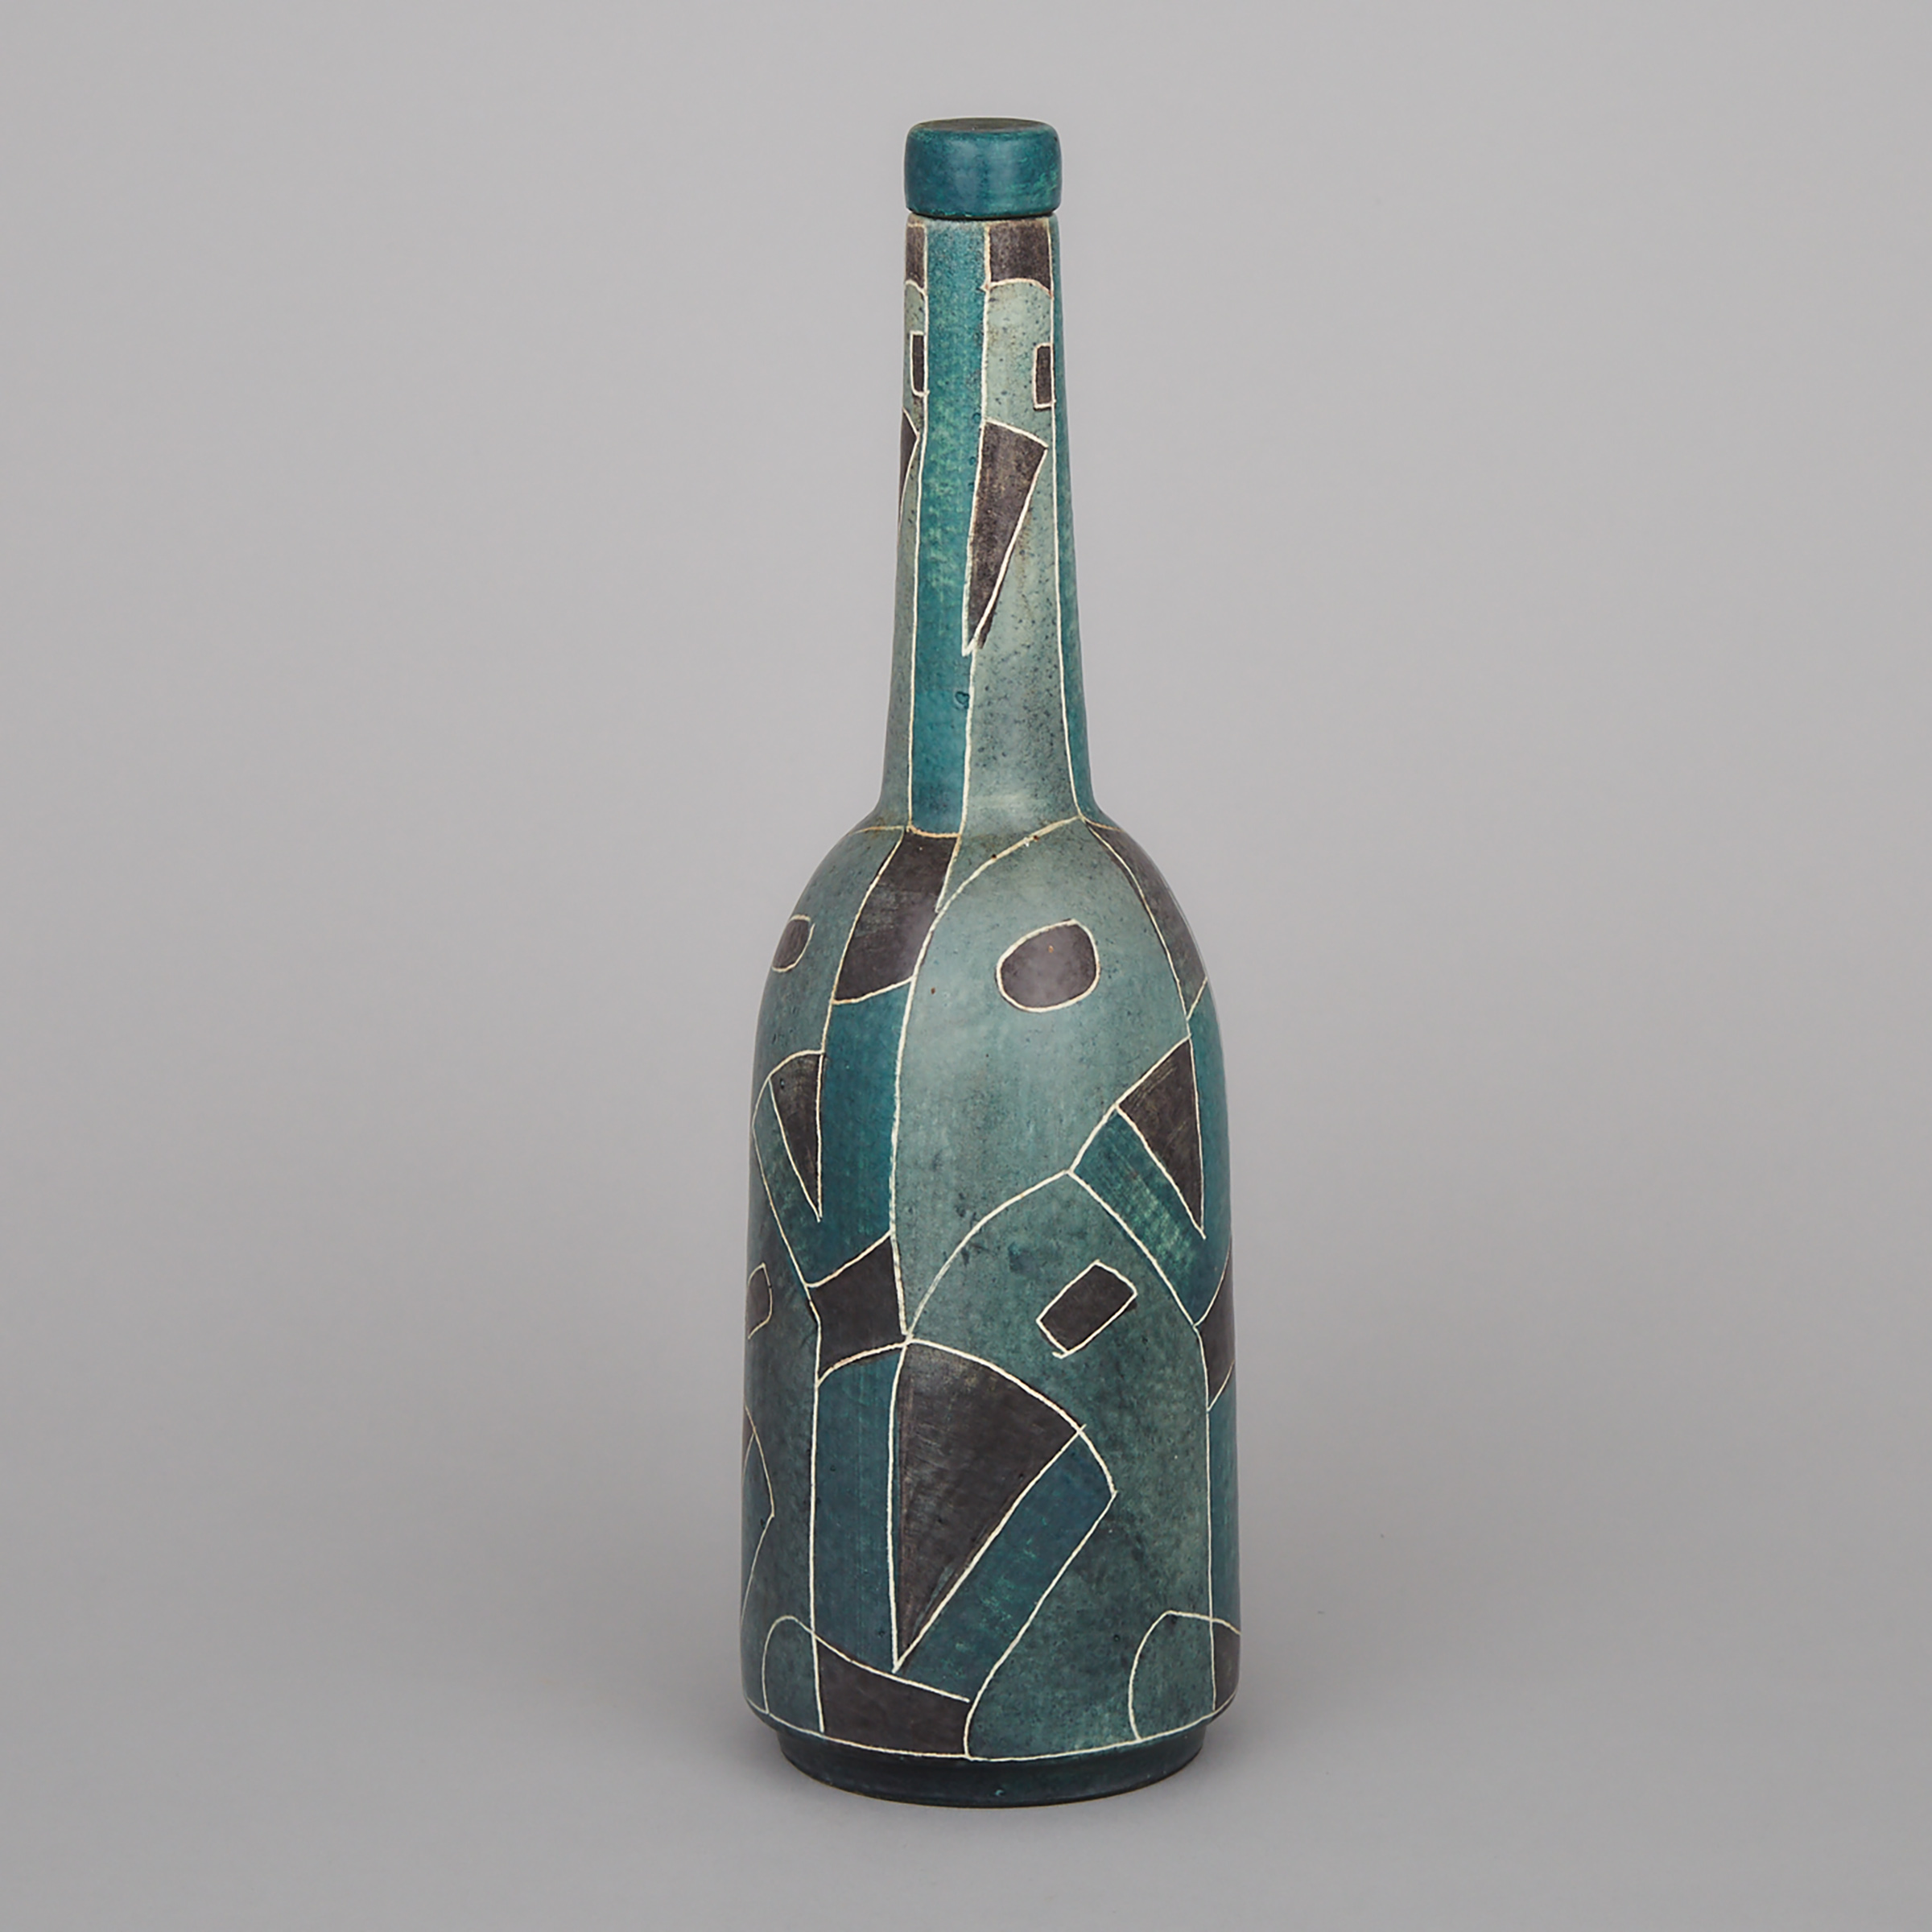 Brooklin Pottery Bottle, Theo and Susan Harlander, 1960s